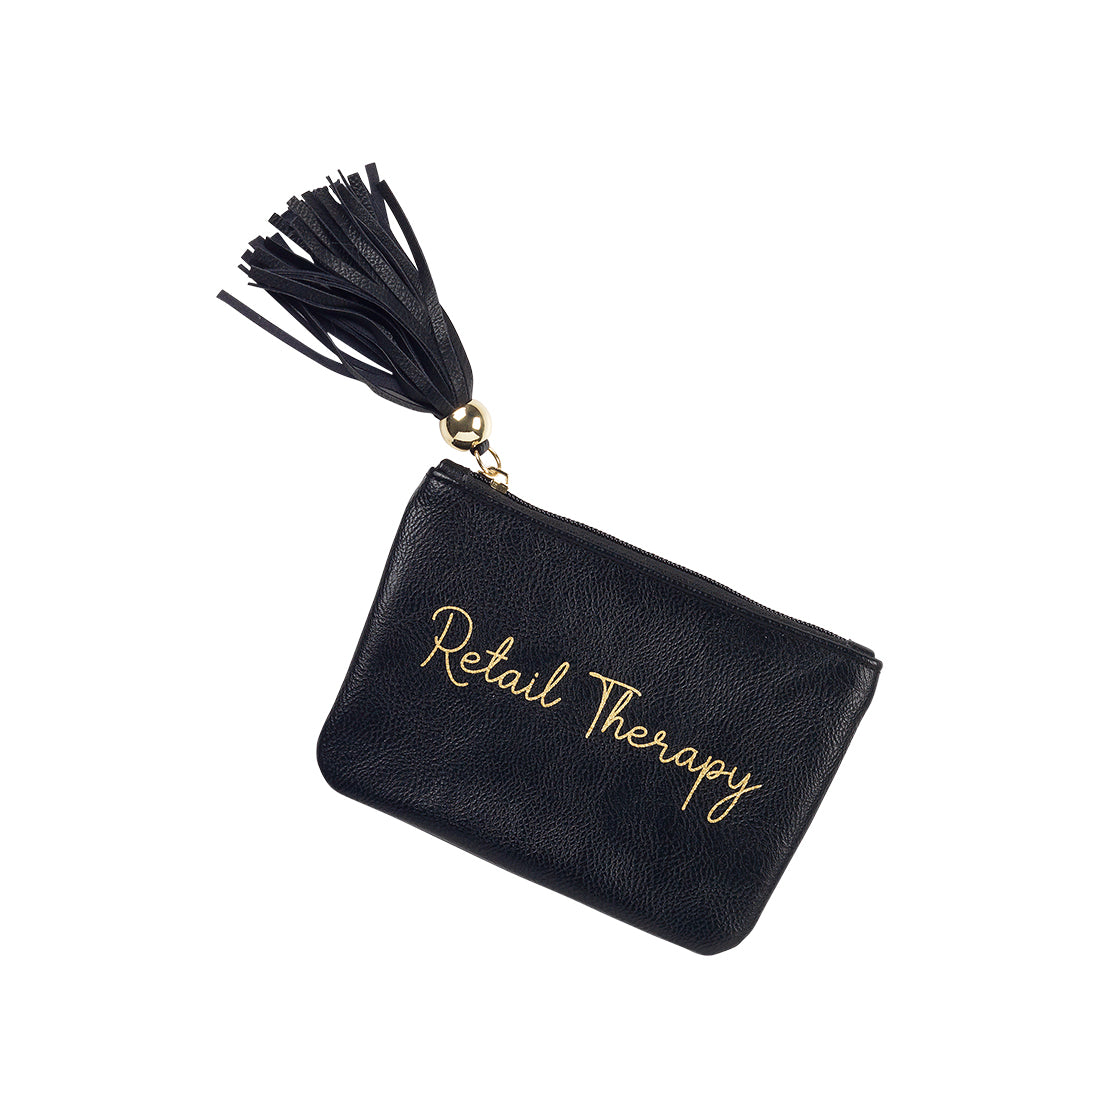 Retail Therapy Coin Purse